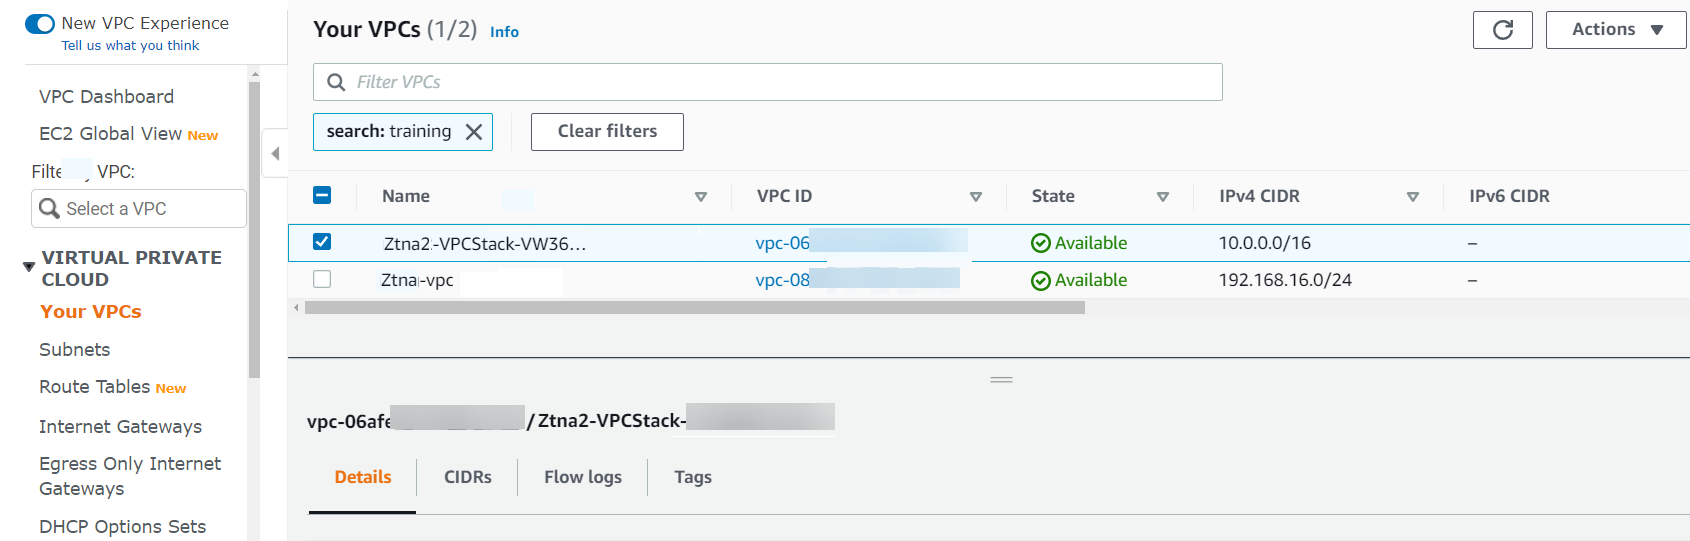 New VPC details